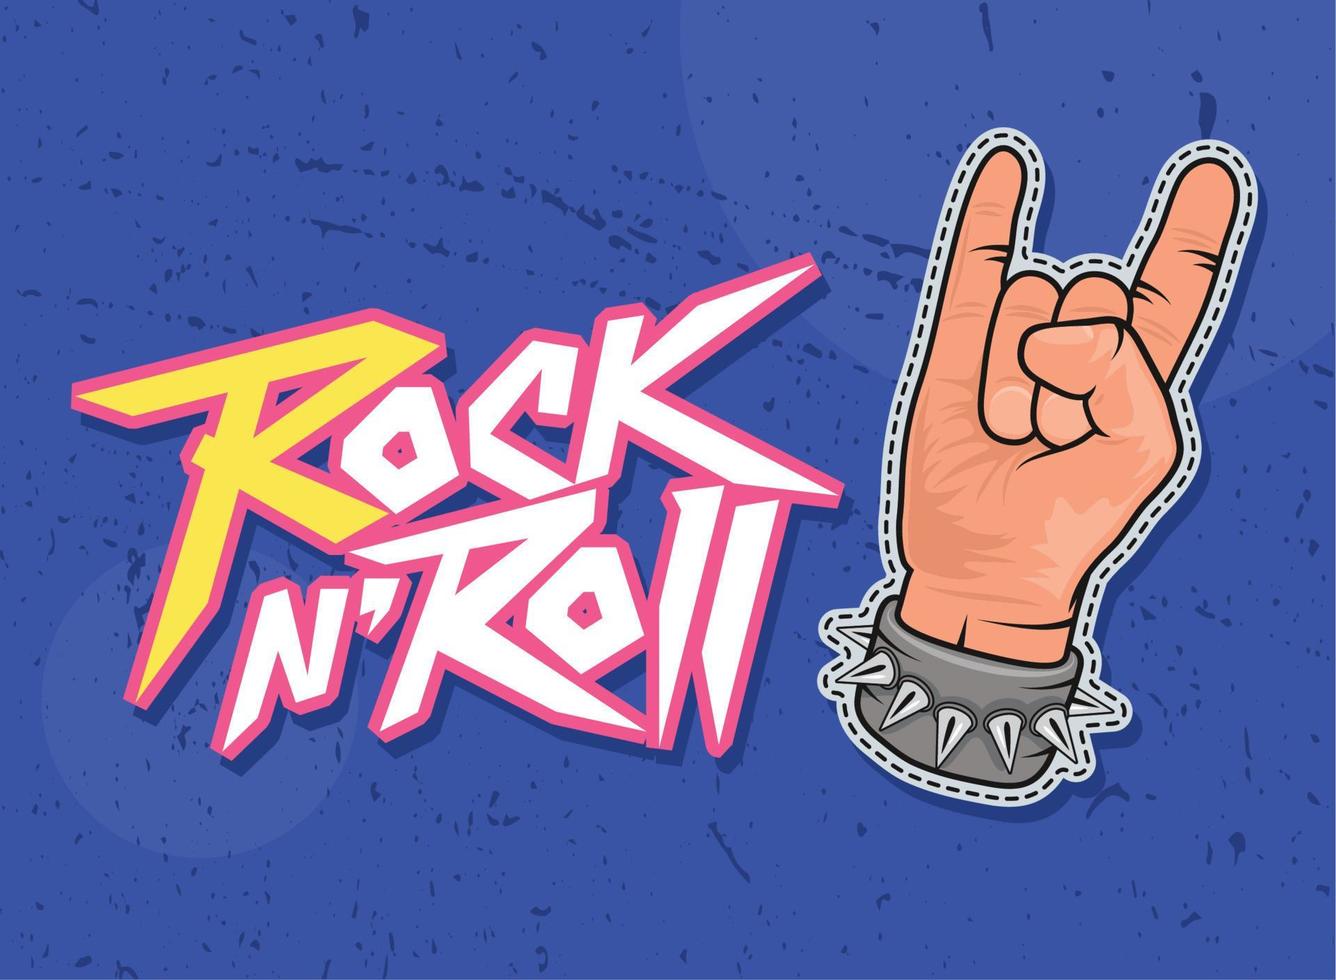 rock and roll patch vector